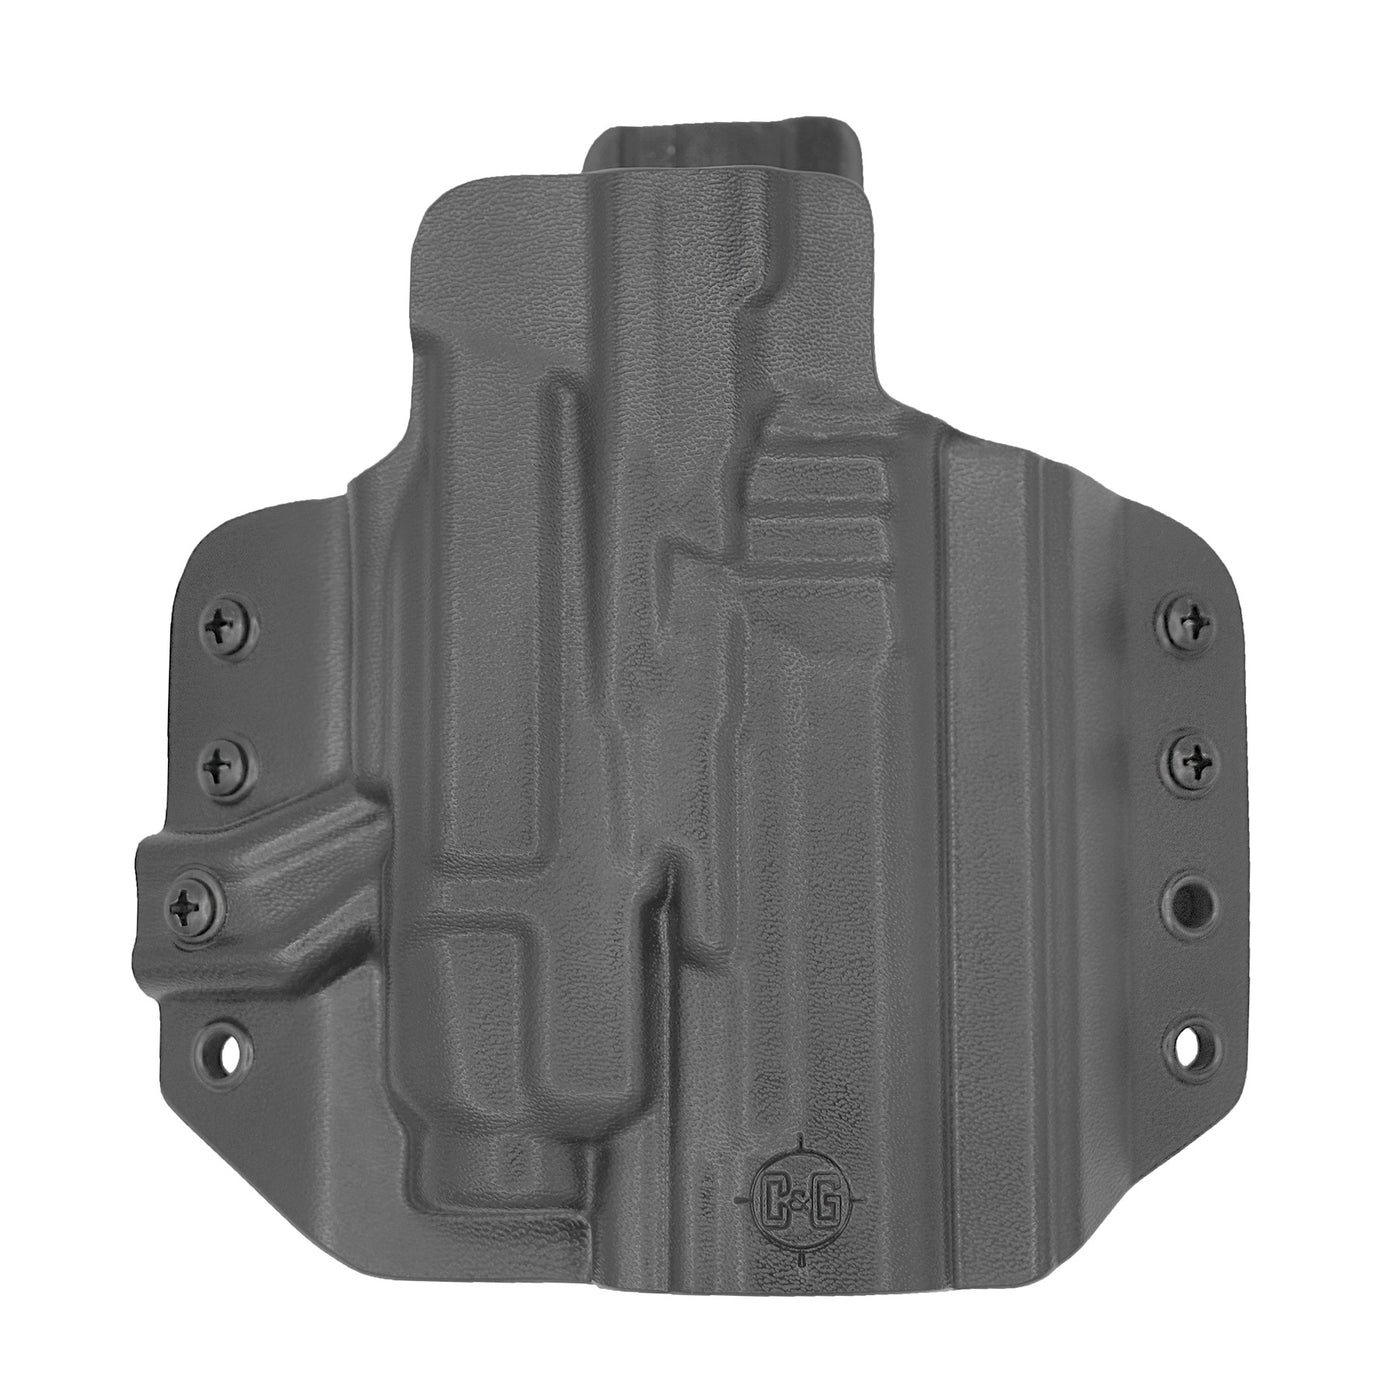 C&G Holsters quickship OWB Tactical CZ P07/09 Streamlight TLR7/a